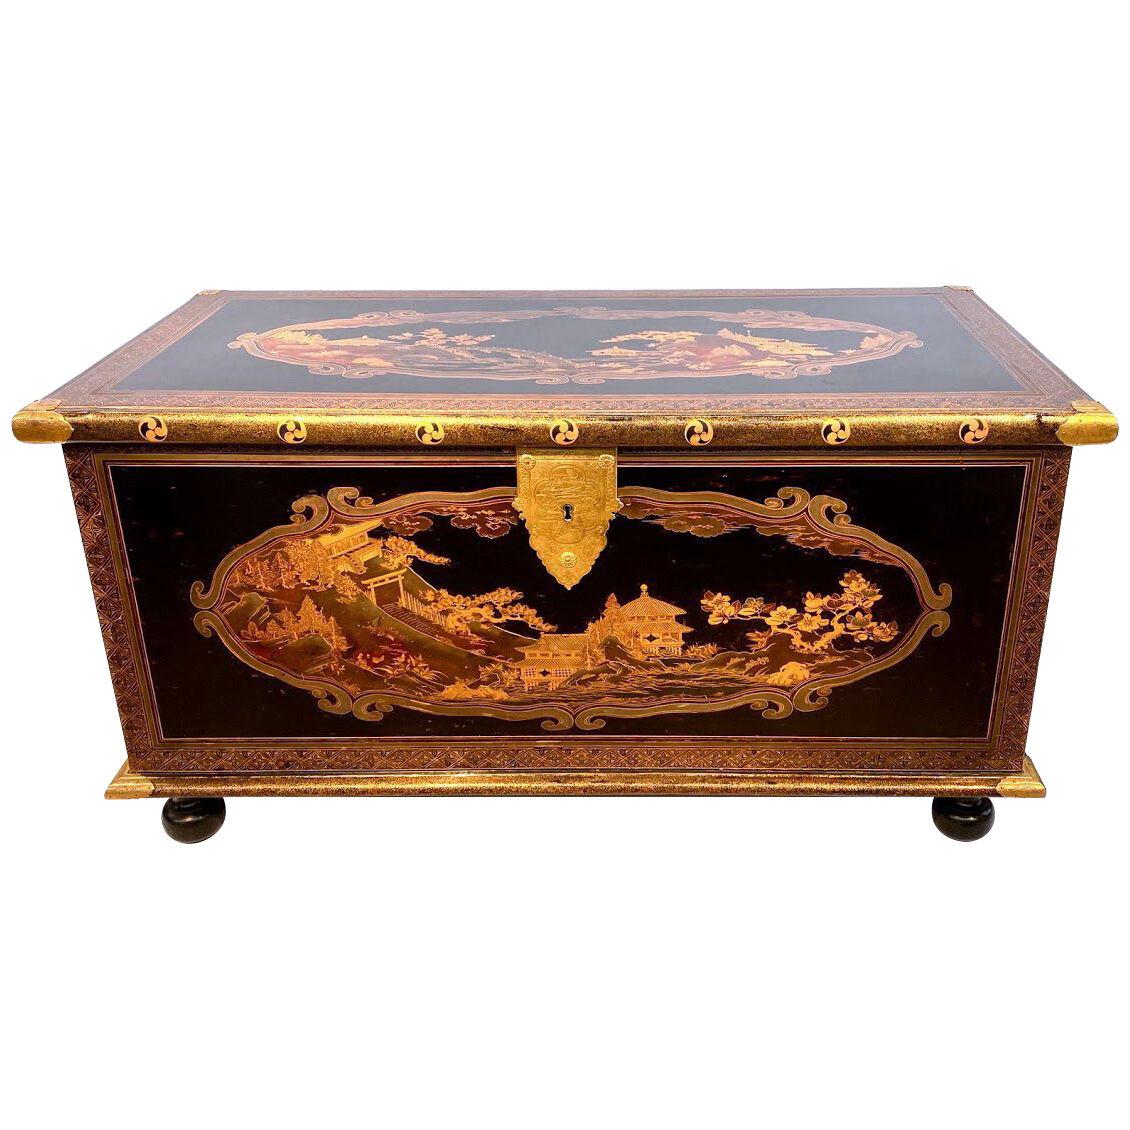 A Japanese lacquer chest